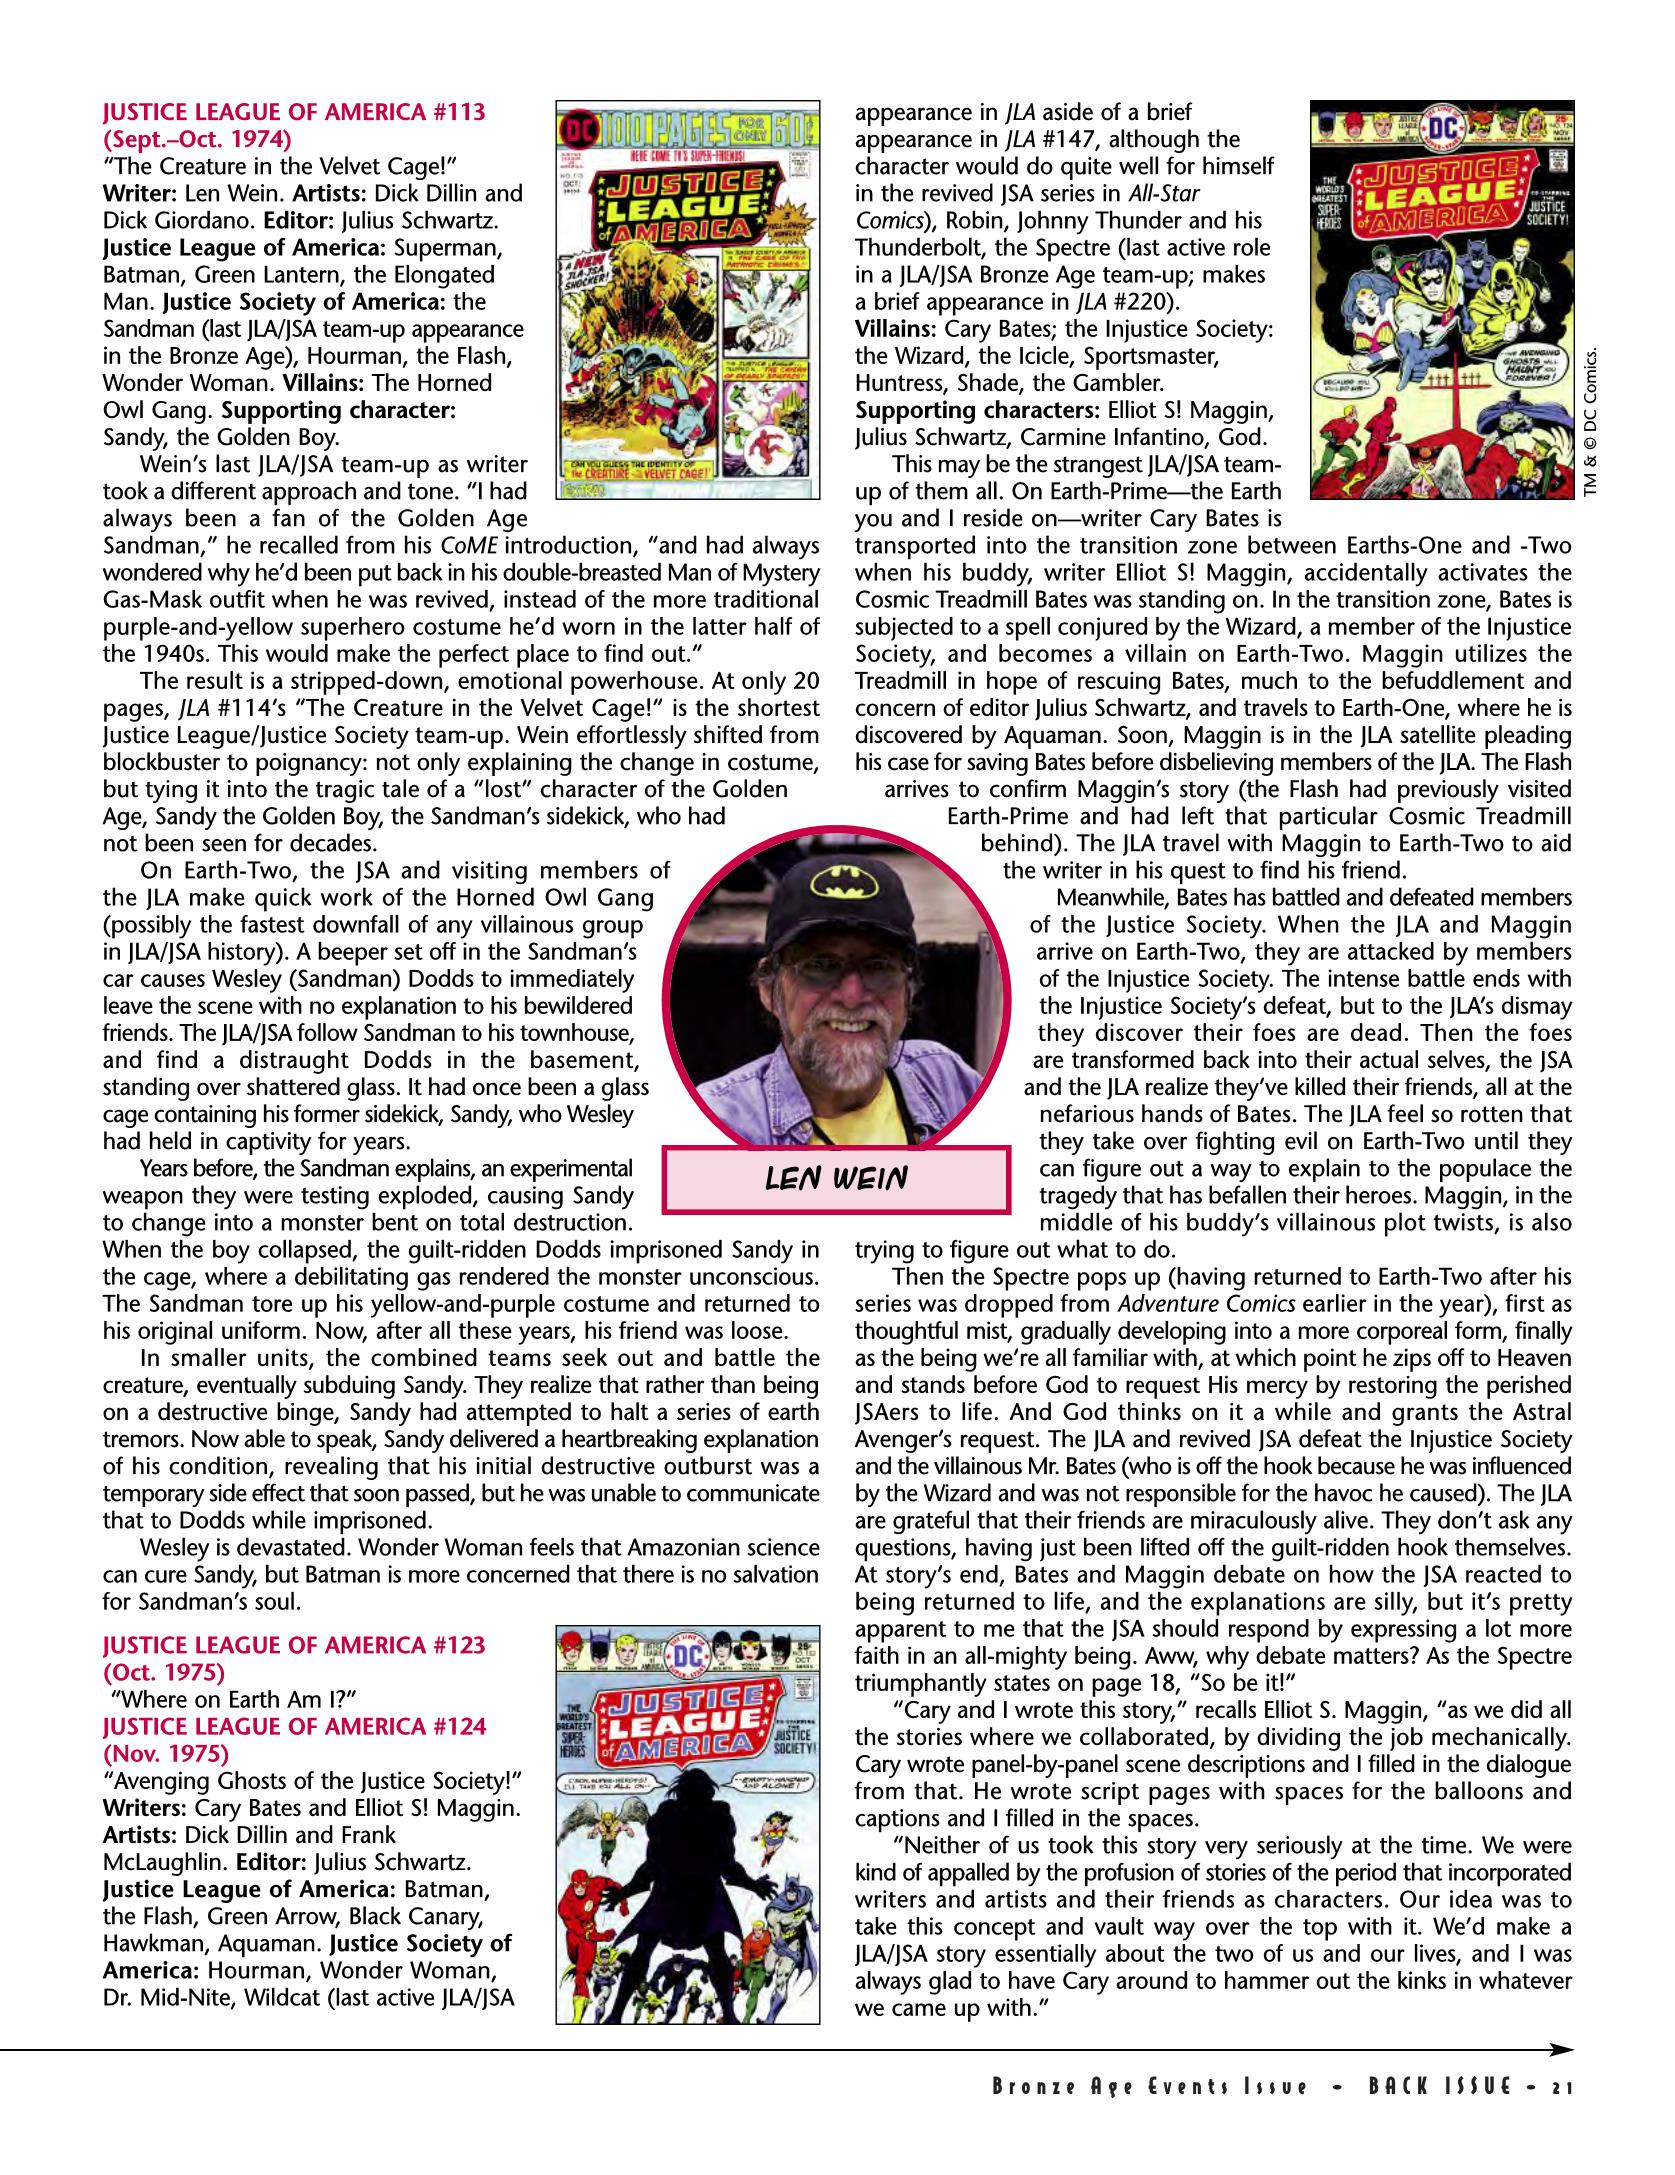 Read online Back Issue comic -  Issue #82 - 23